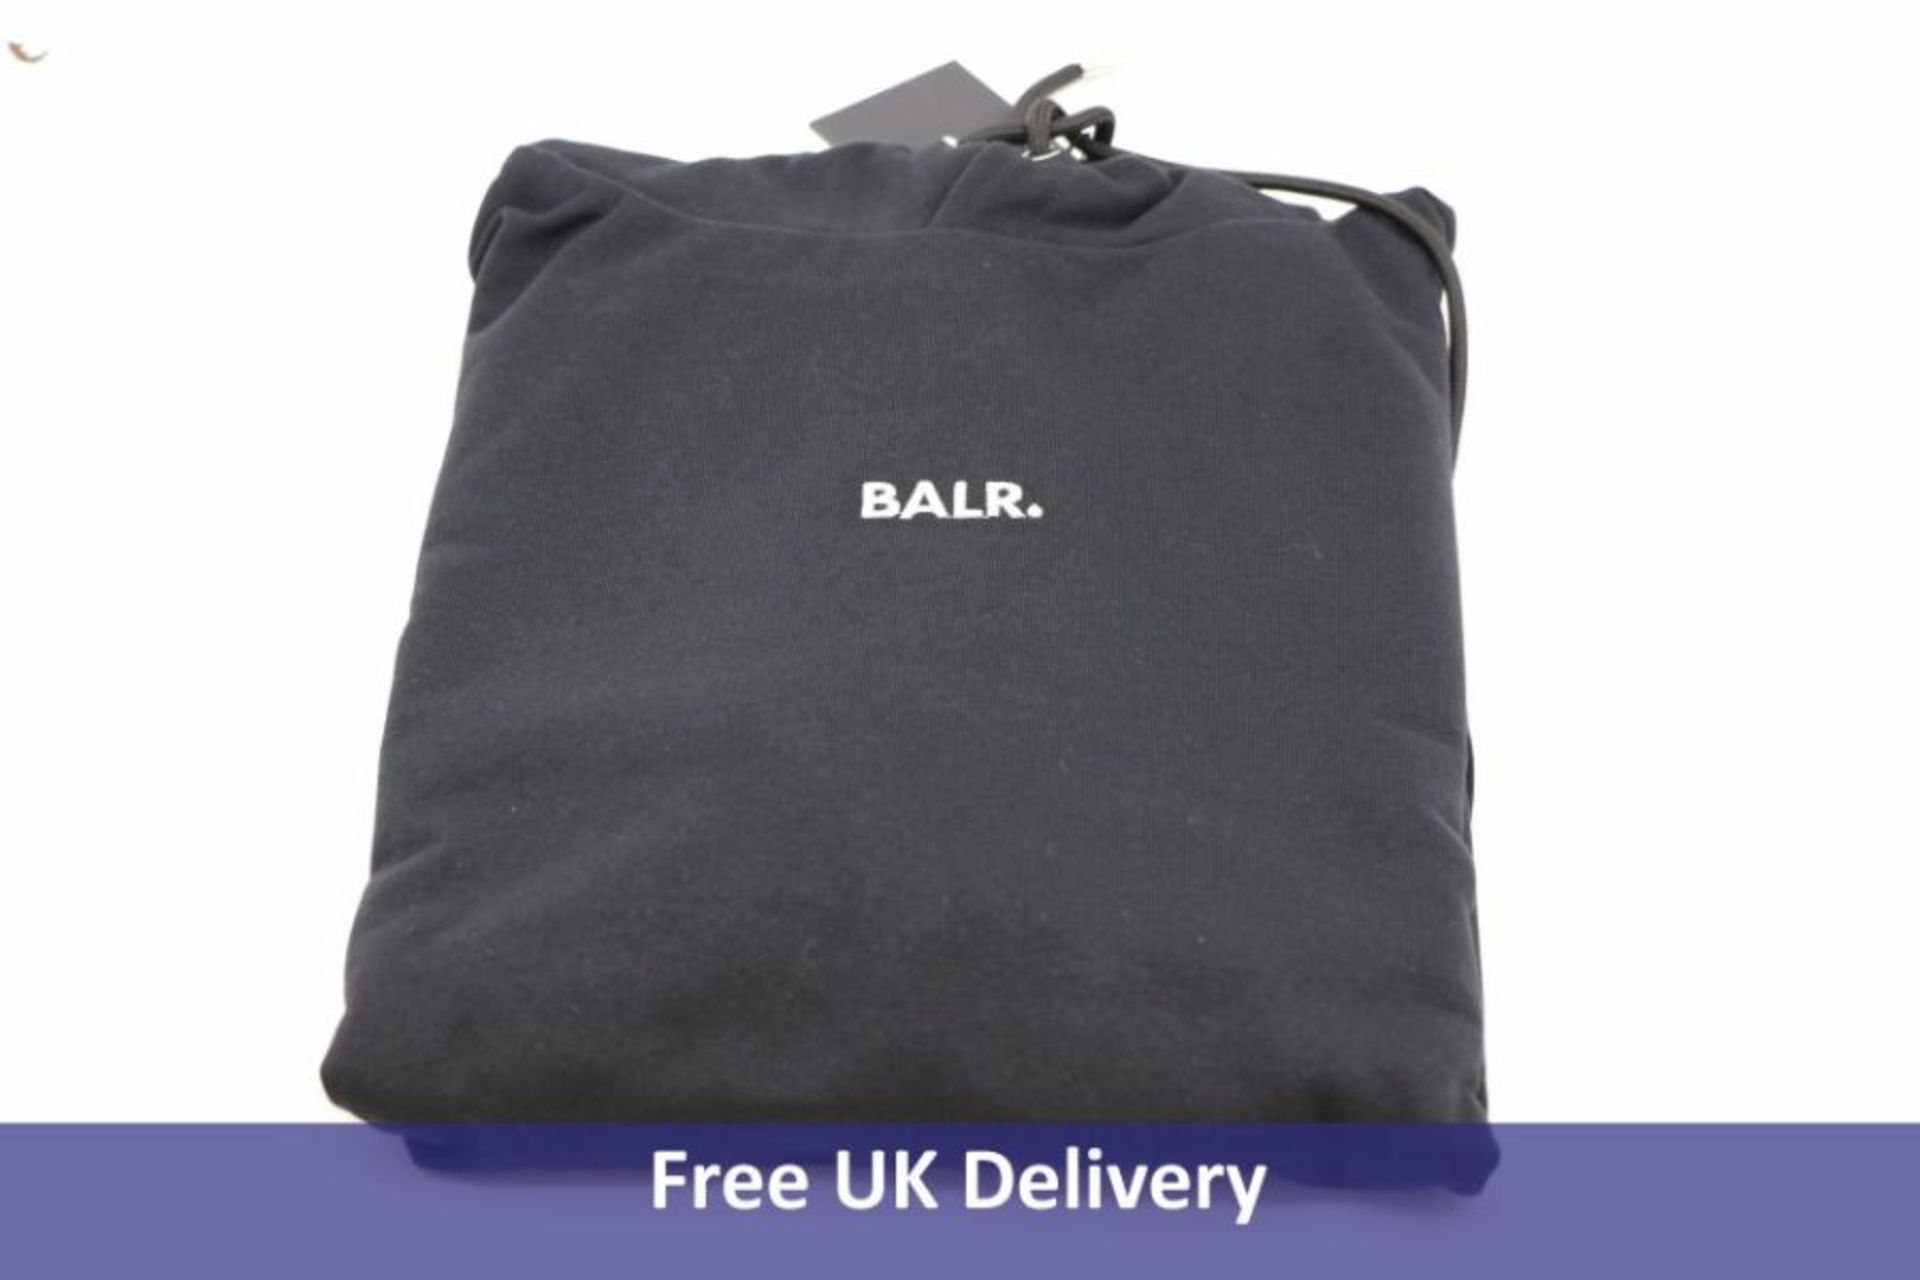 Balr Men's Q Series Logo Hoodie, Black, Size M, Brand New With Tag